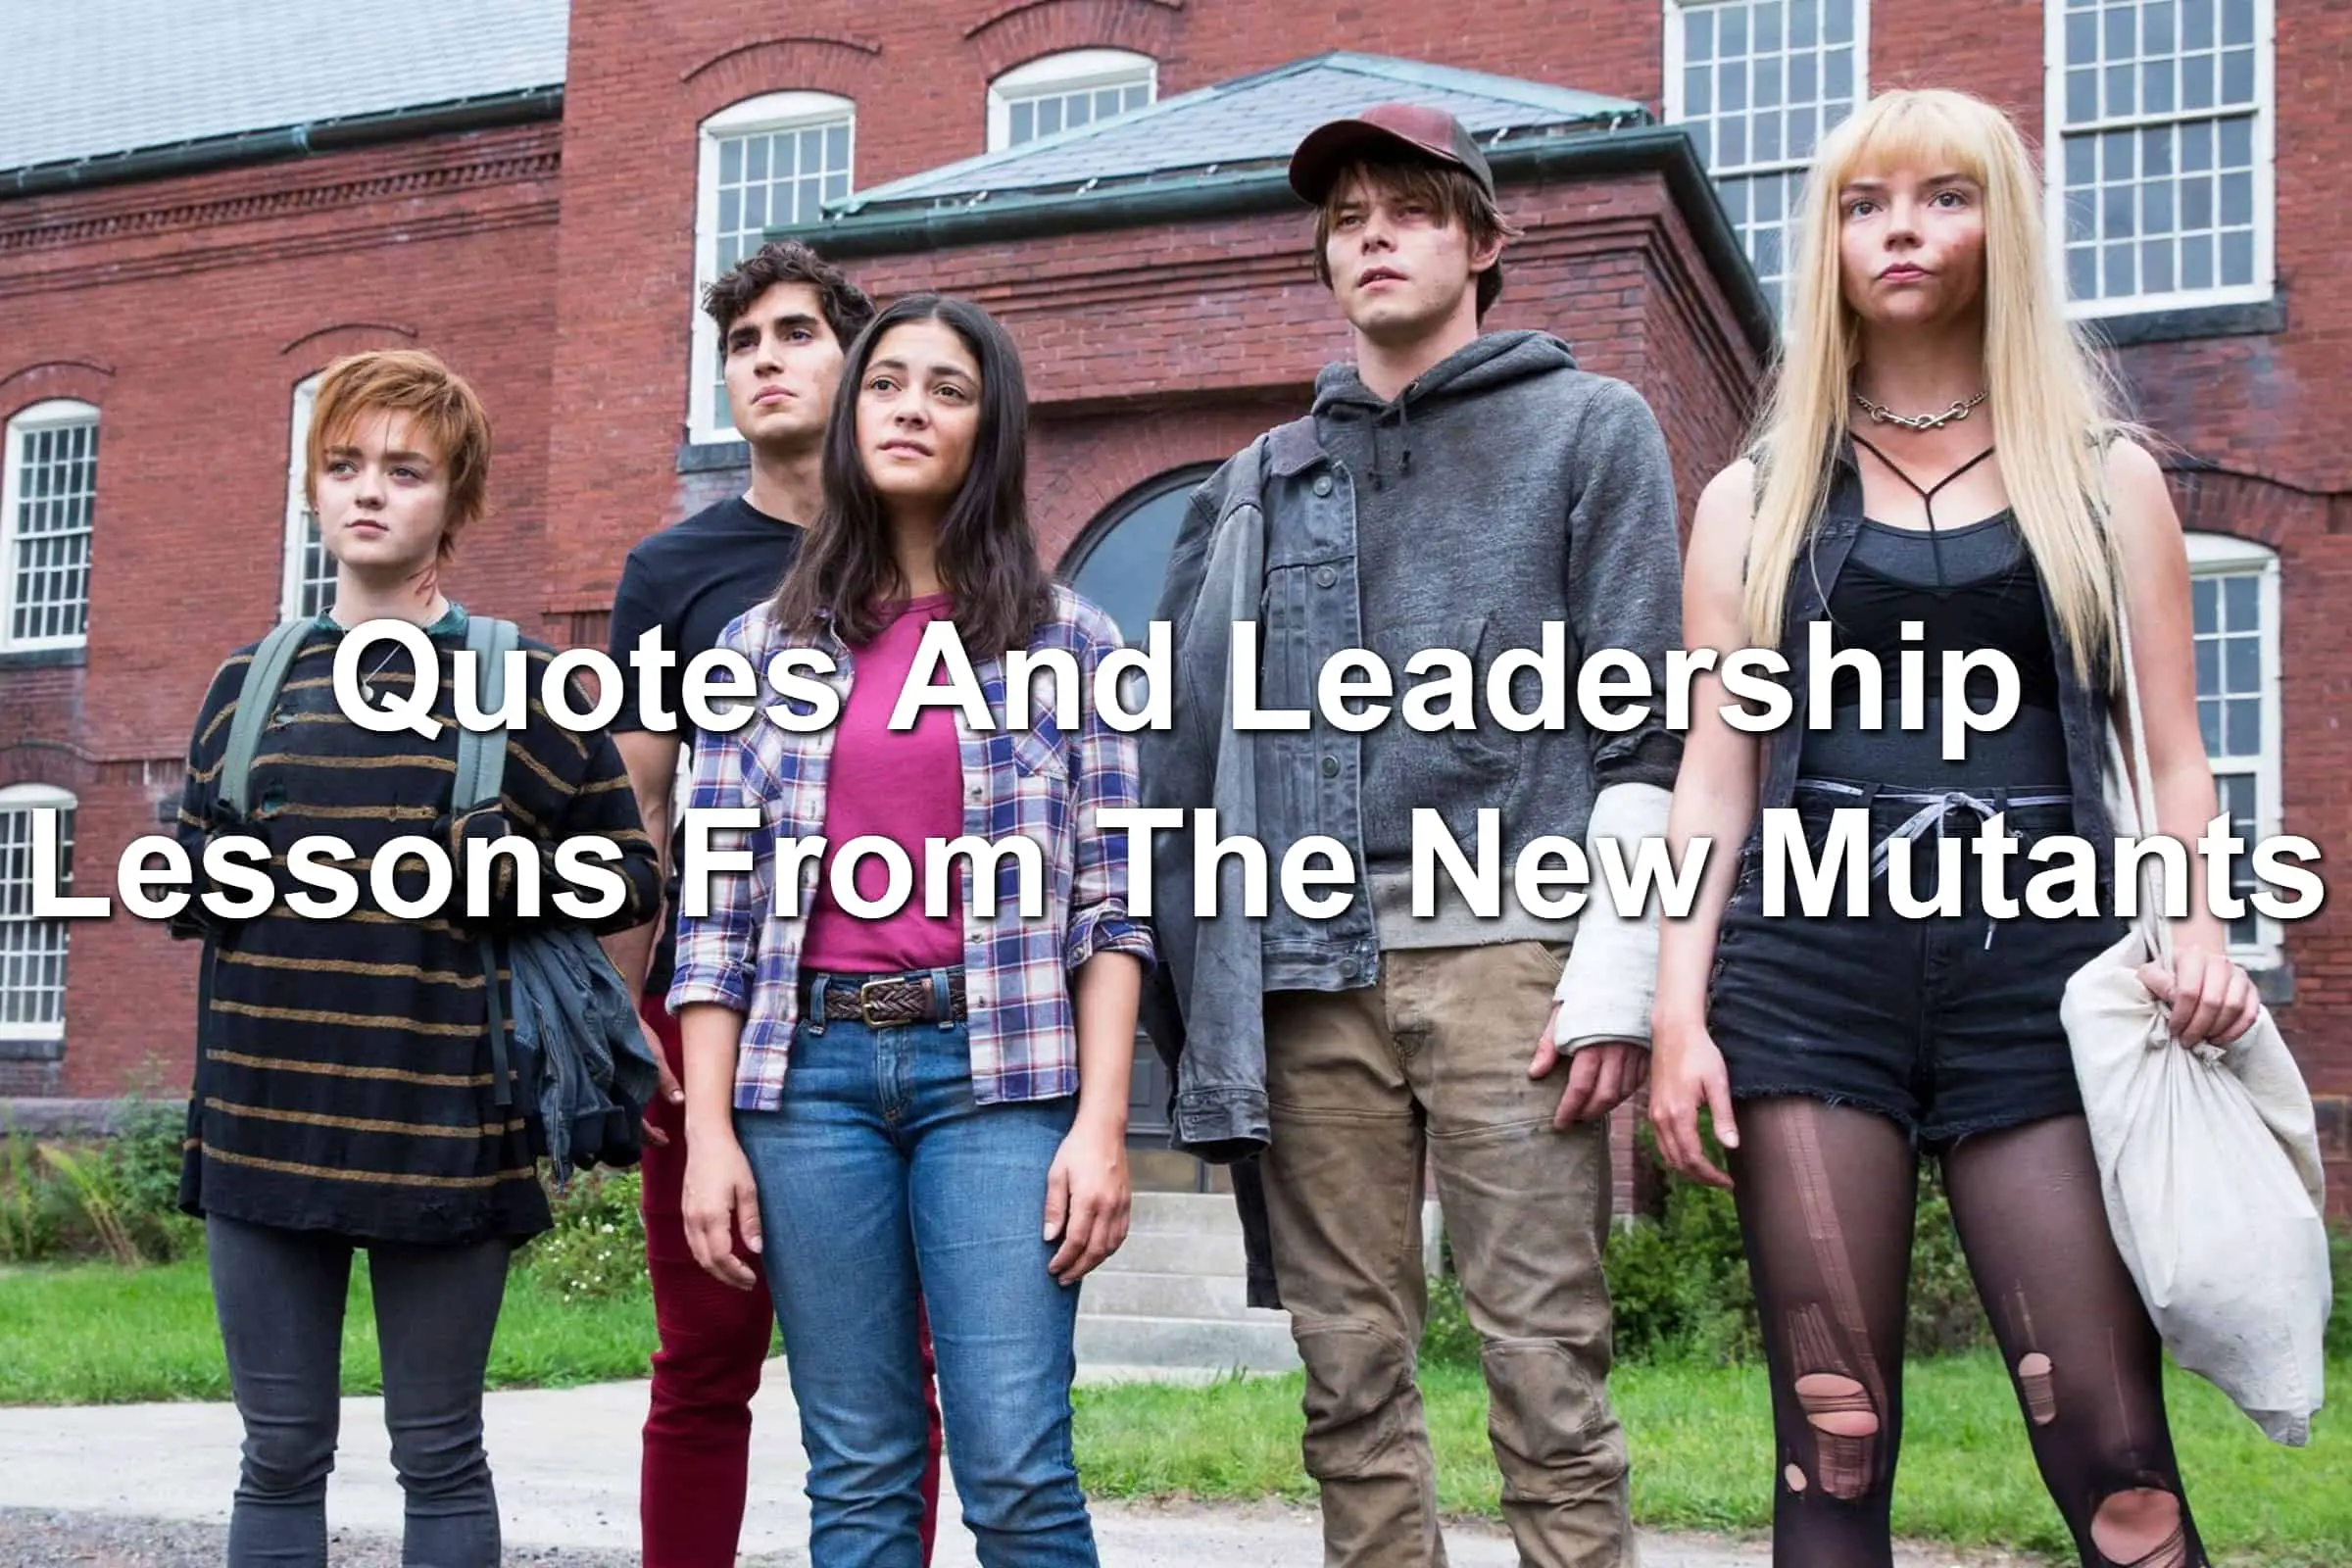 Quotes And Leadership Lessons From The New Mutants